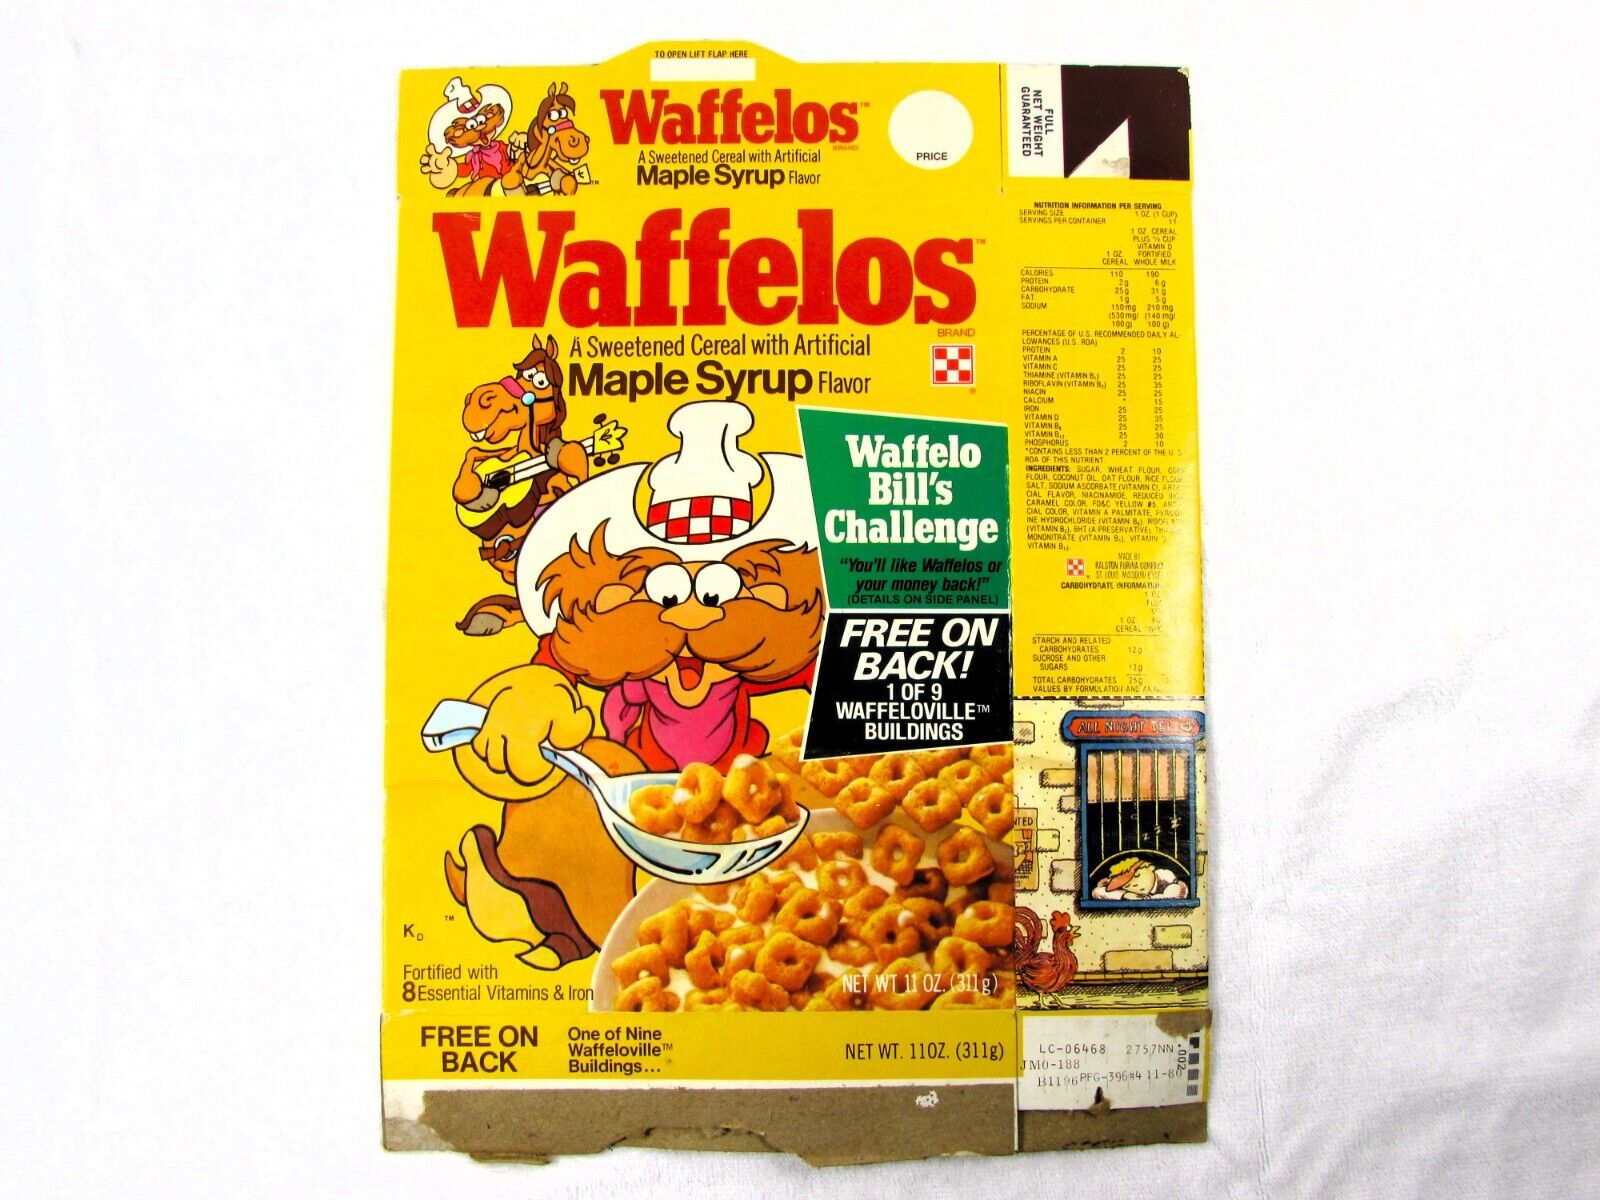 Original 1979 Ralston Maple Syrup Waffelos Cereal Box – Rare, Not A Reproduction